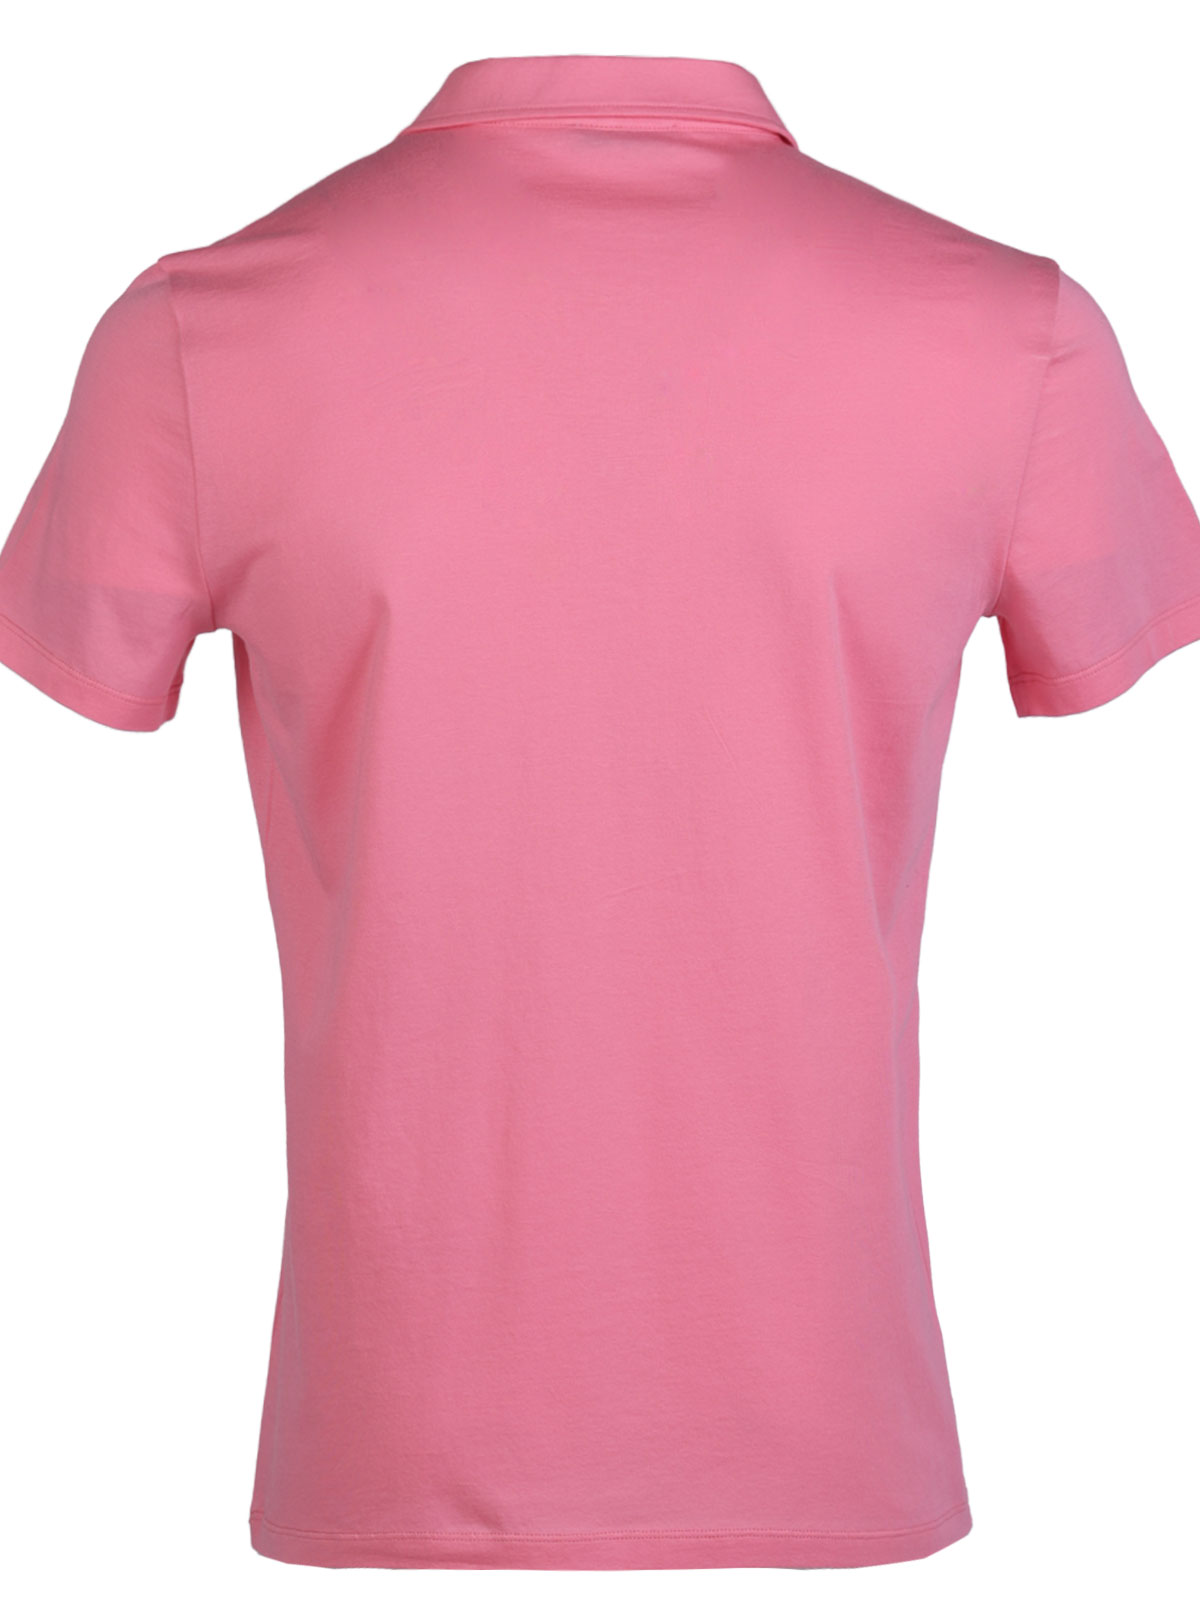 Tshirt in pink with a colla - 94418 € 33.18 img2